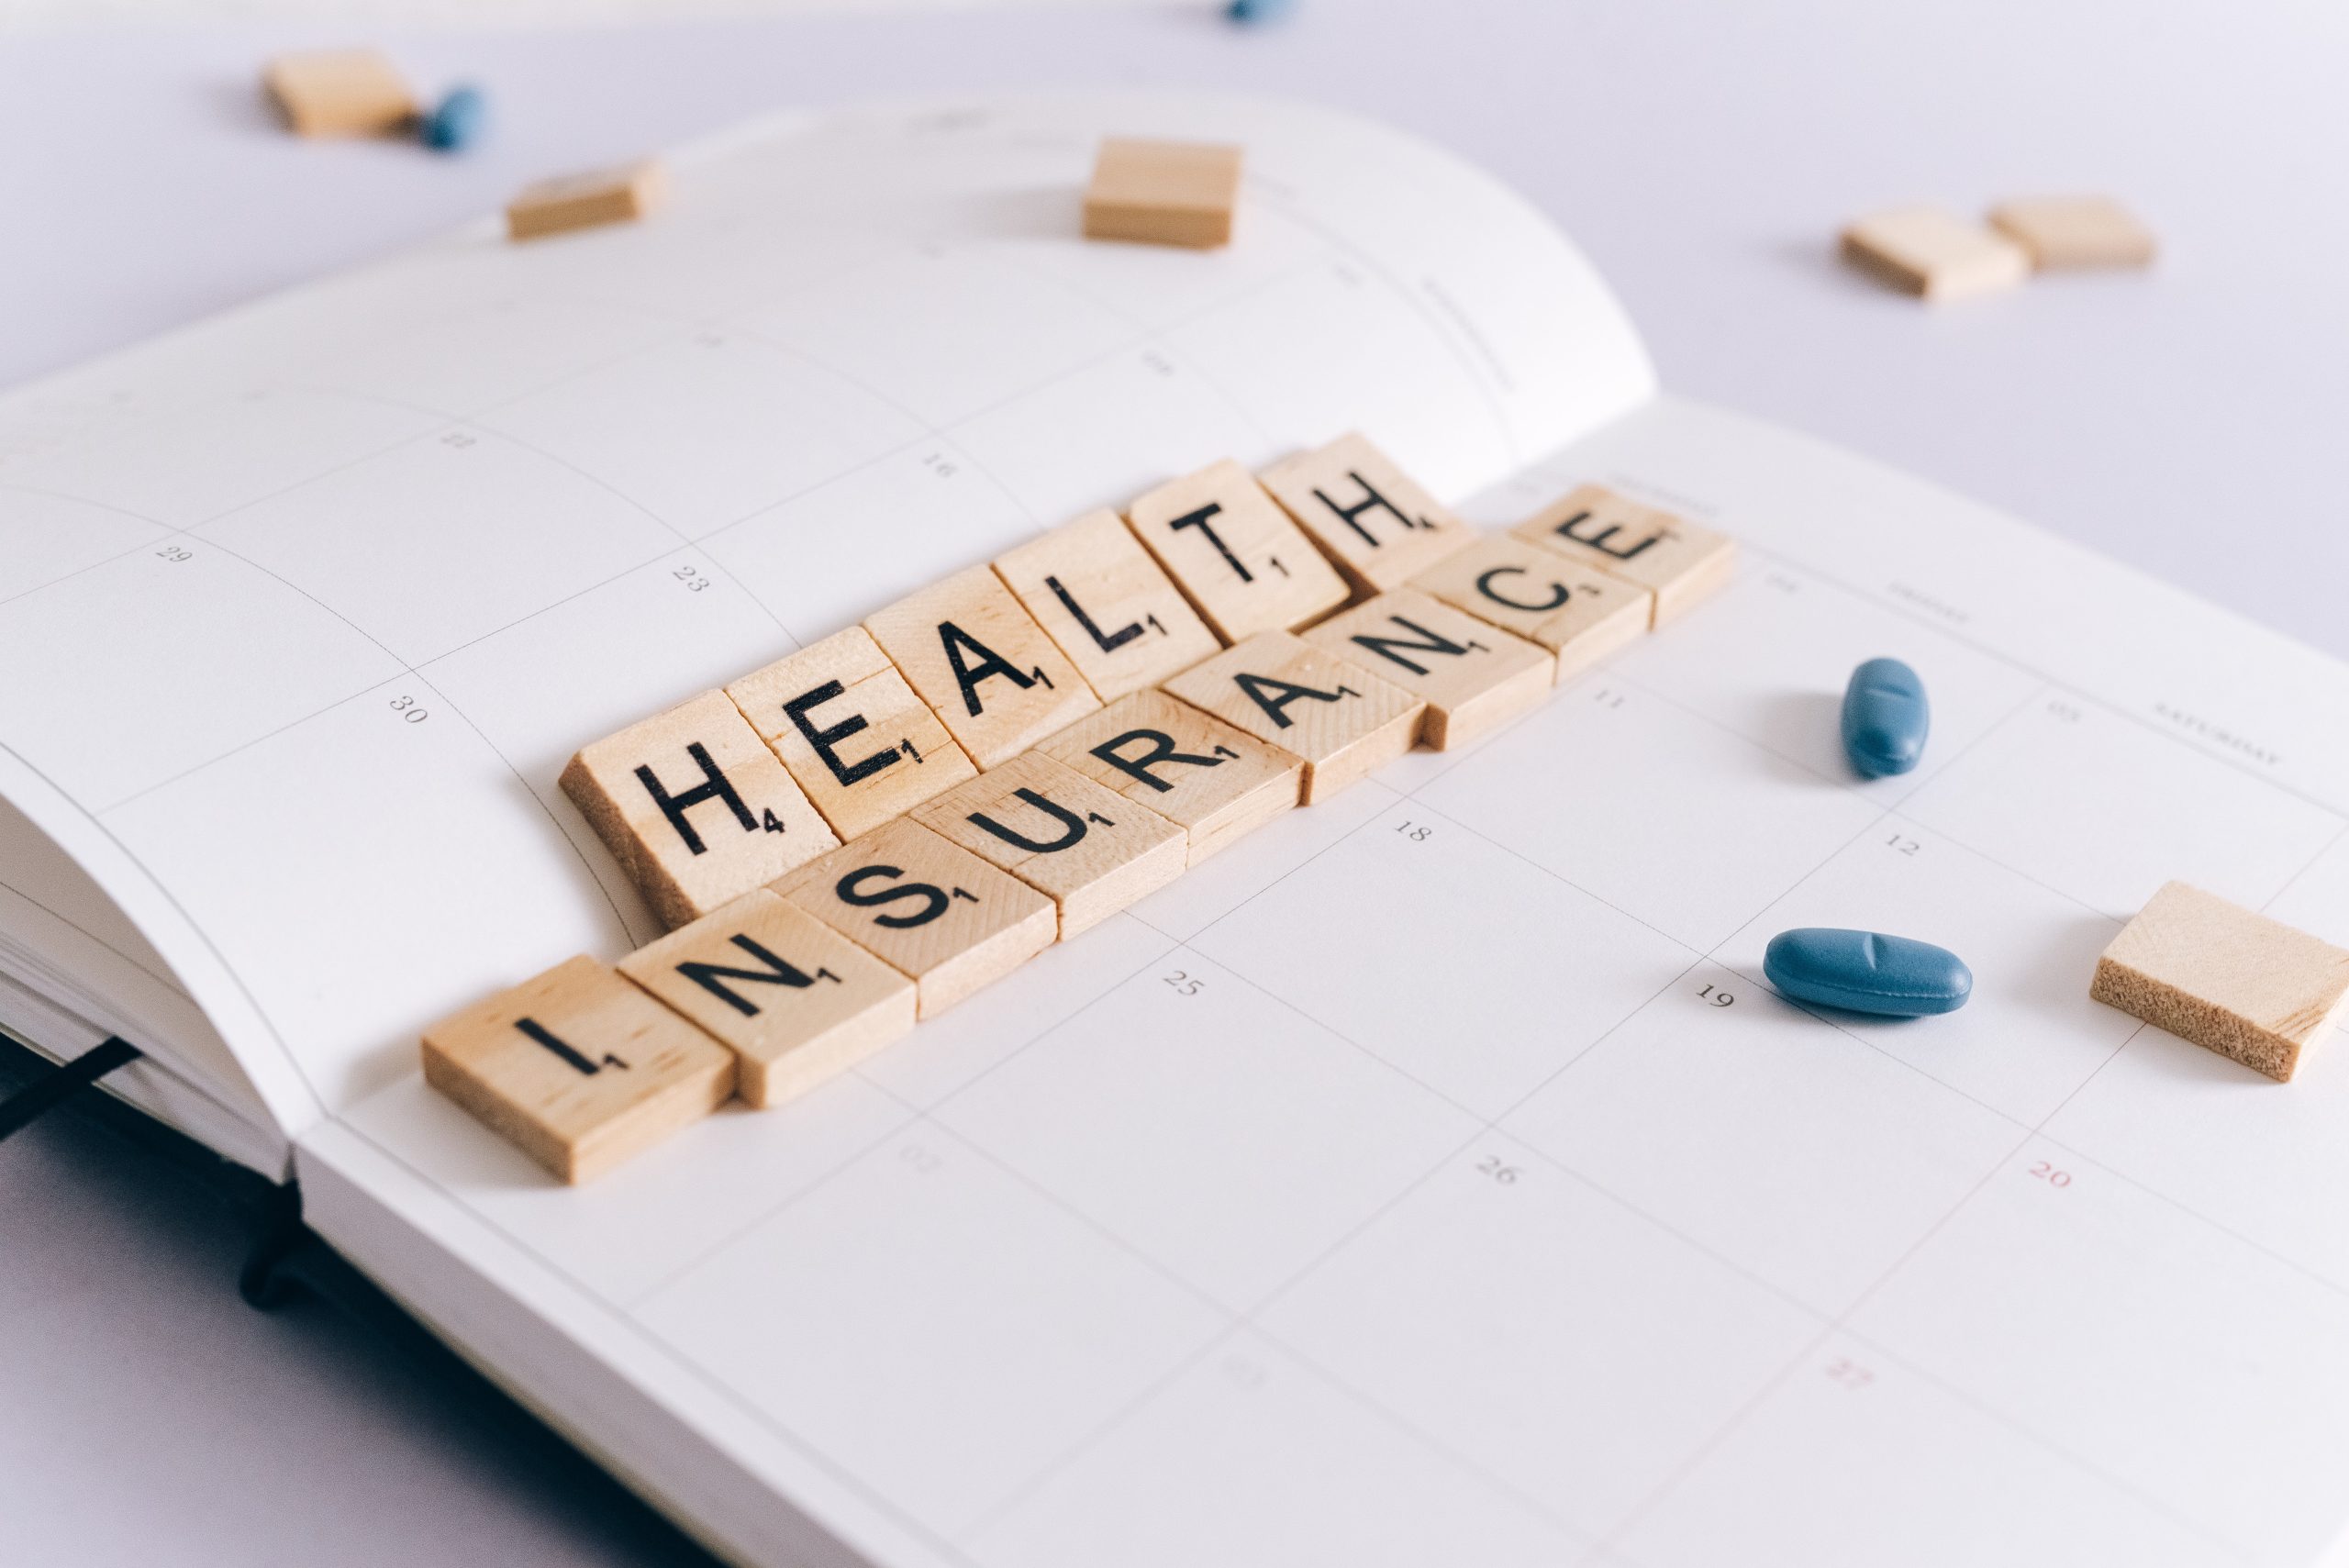 A daily planner is open on a table with scattered Scrabble tiles and prescription medication. Some of the Scrabble tiles spell out "Health Insurance".